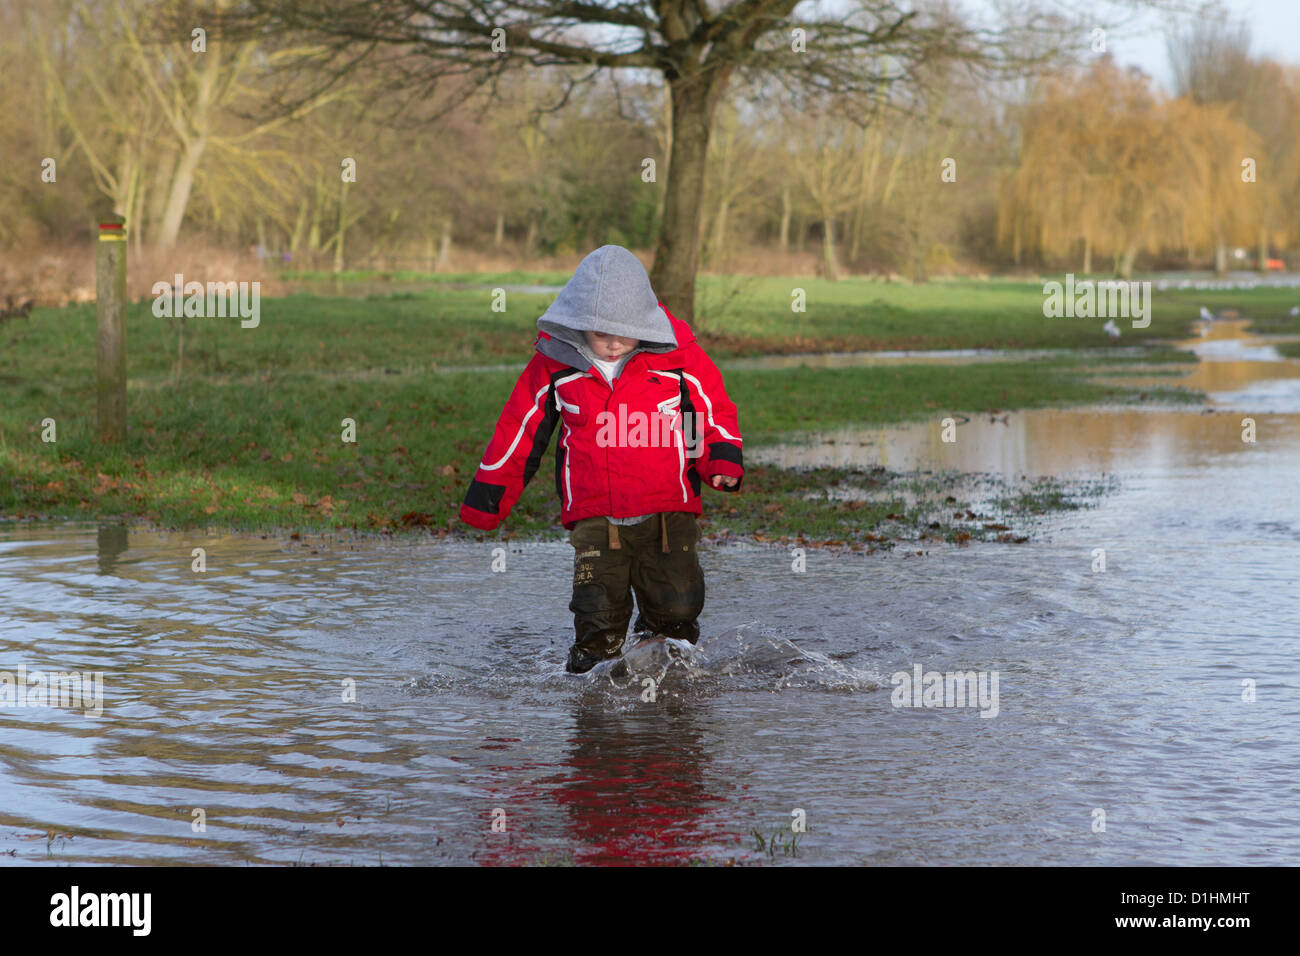 Braintree, Essex, UK. Sunday 23 December 2012. A young boy wades through the floodwaters at Blackwater local nature reserve after the River Blackwater burst it banks due to heavy rain over the weekend. Stock Photo